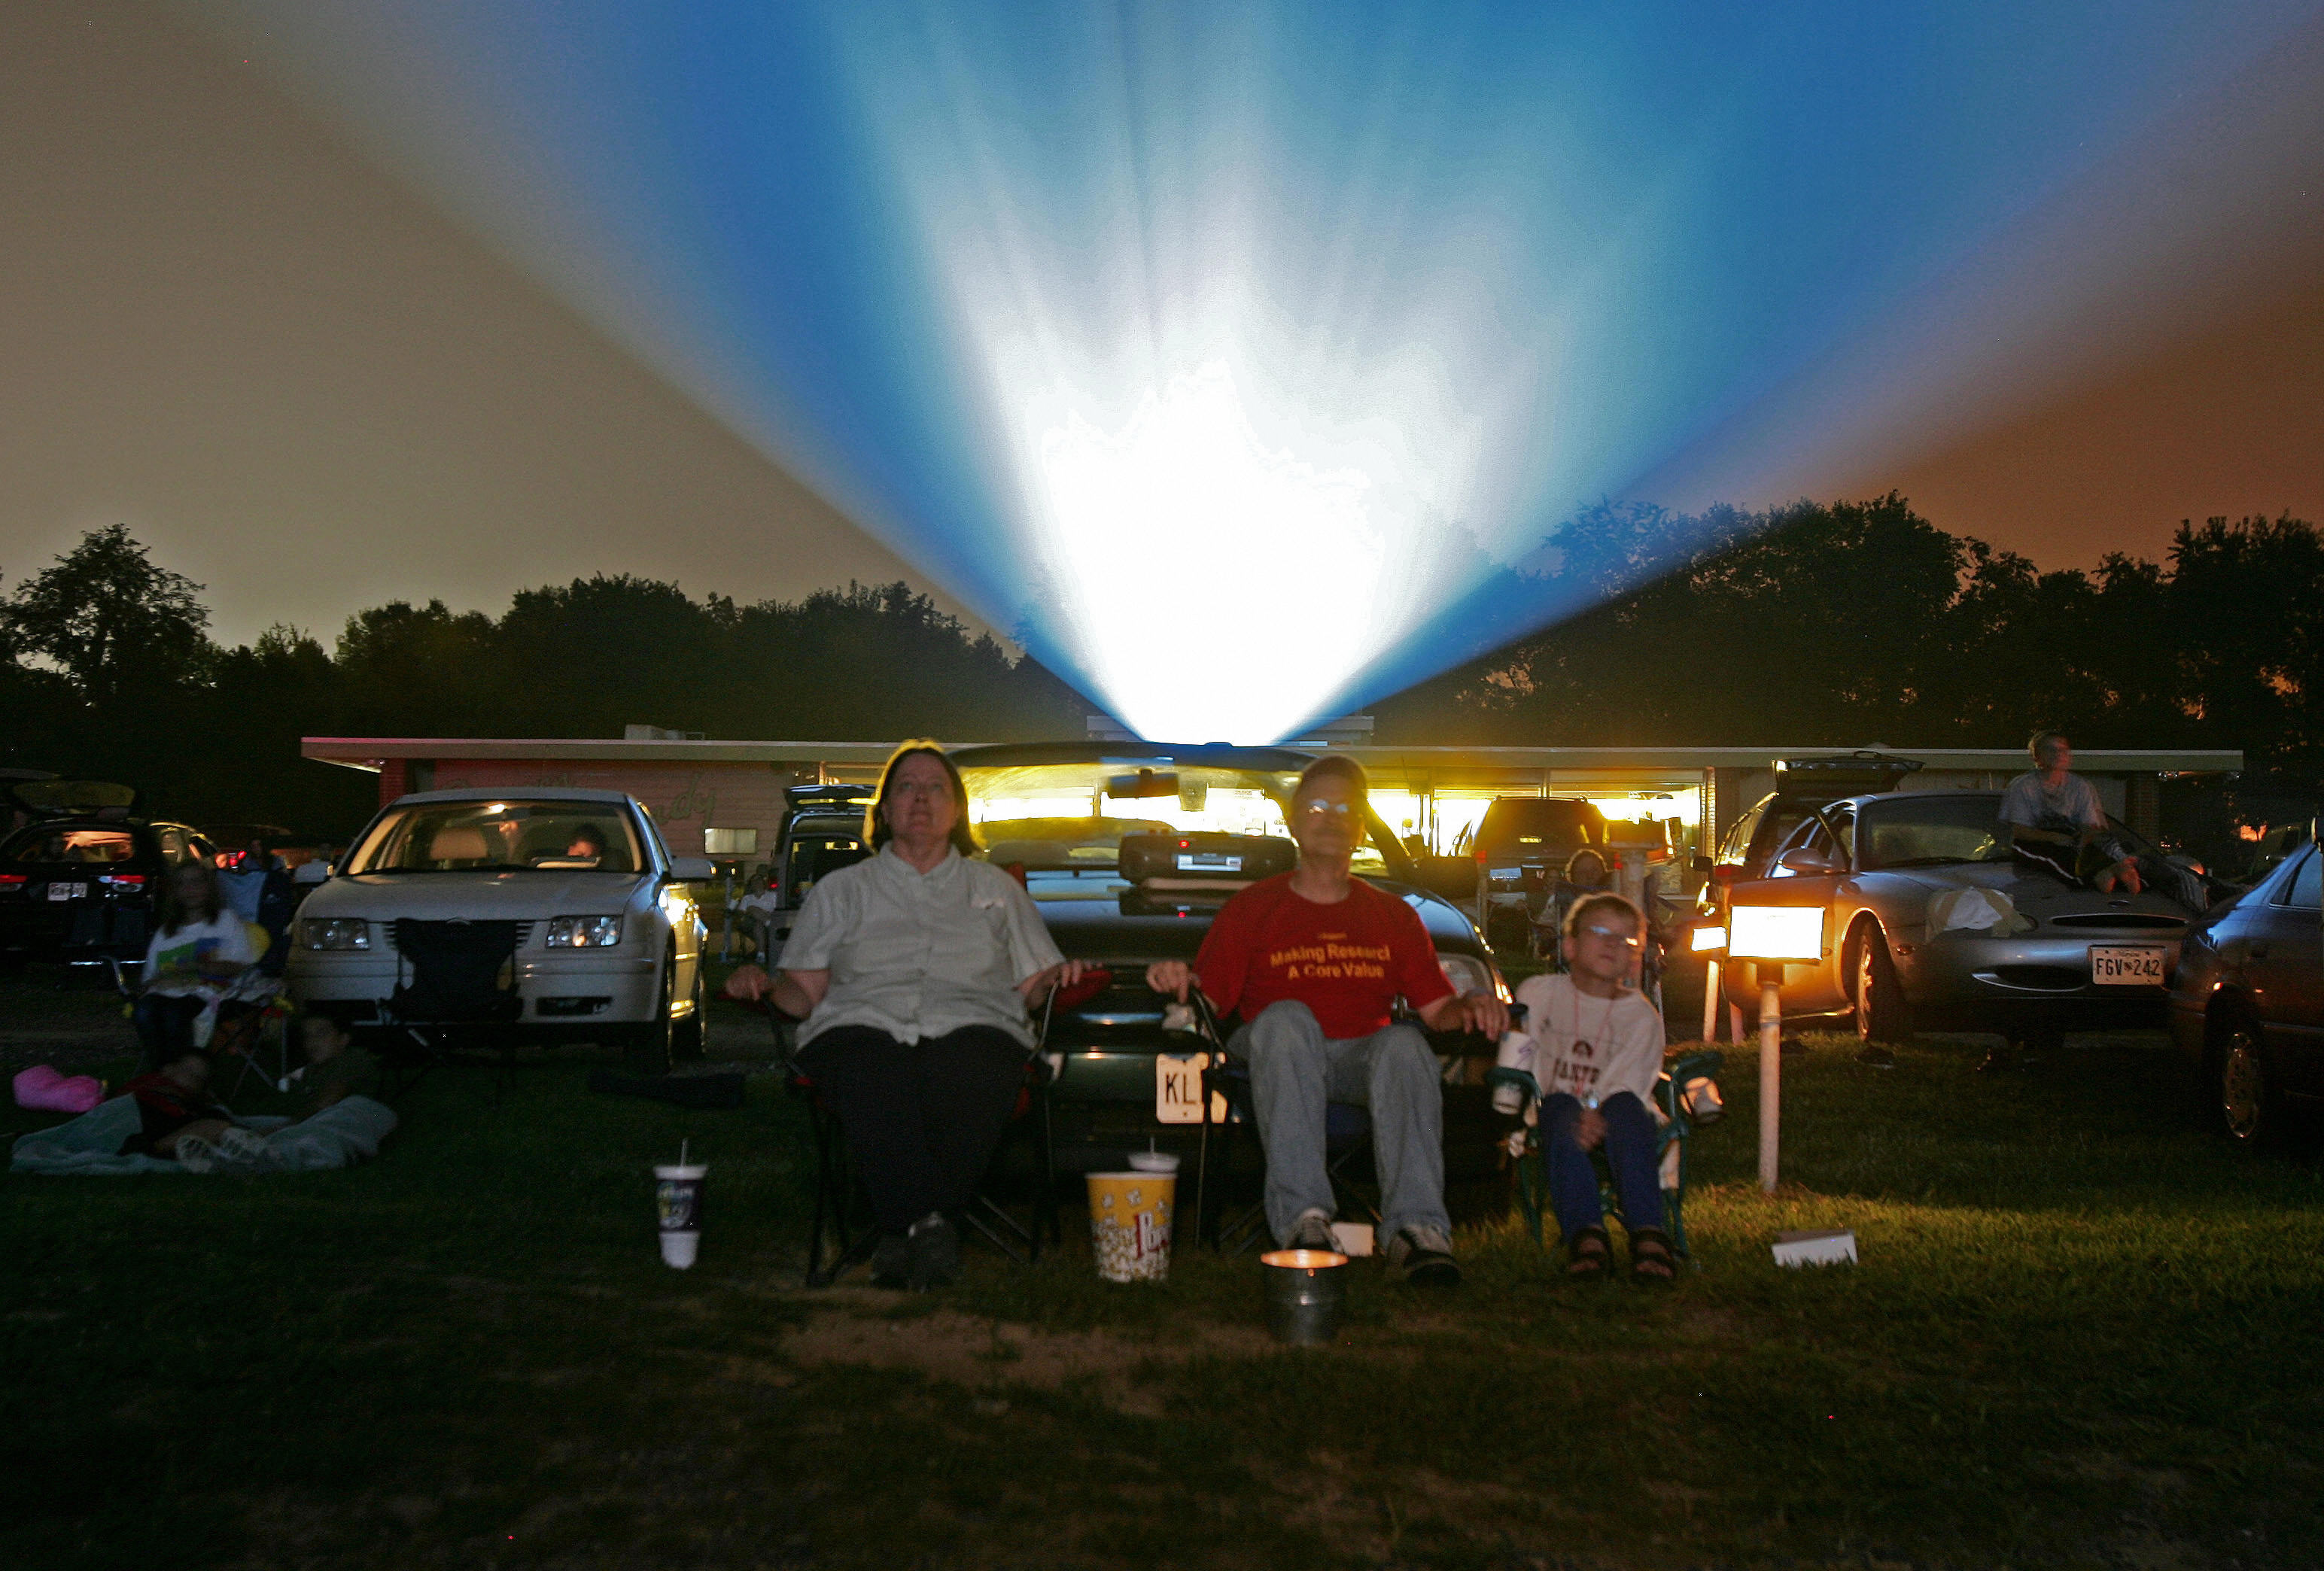 Moviegoers at the Bengies Drive-In outside of Baltimore, which boasts the largest screen on the East Coast. It reopened in June this summer to accommodate movie-hungry crowds.&nbsp;